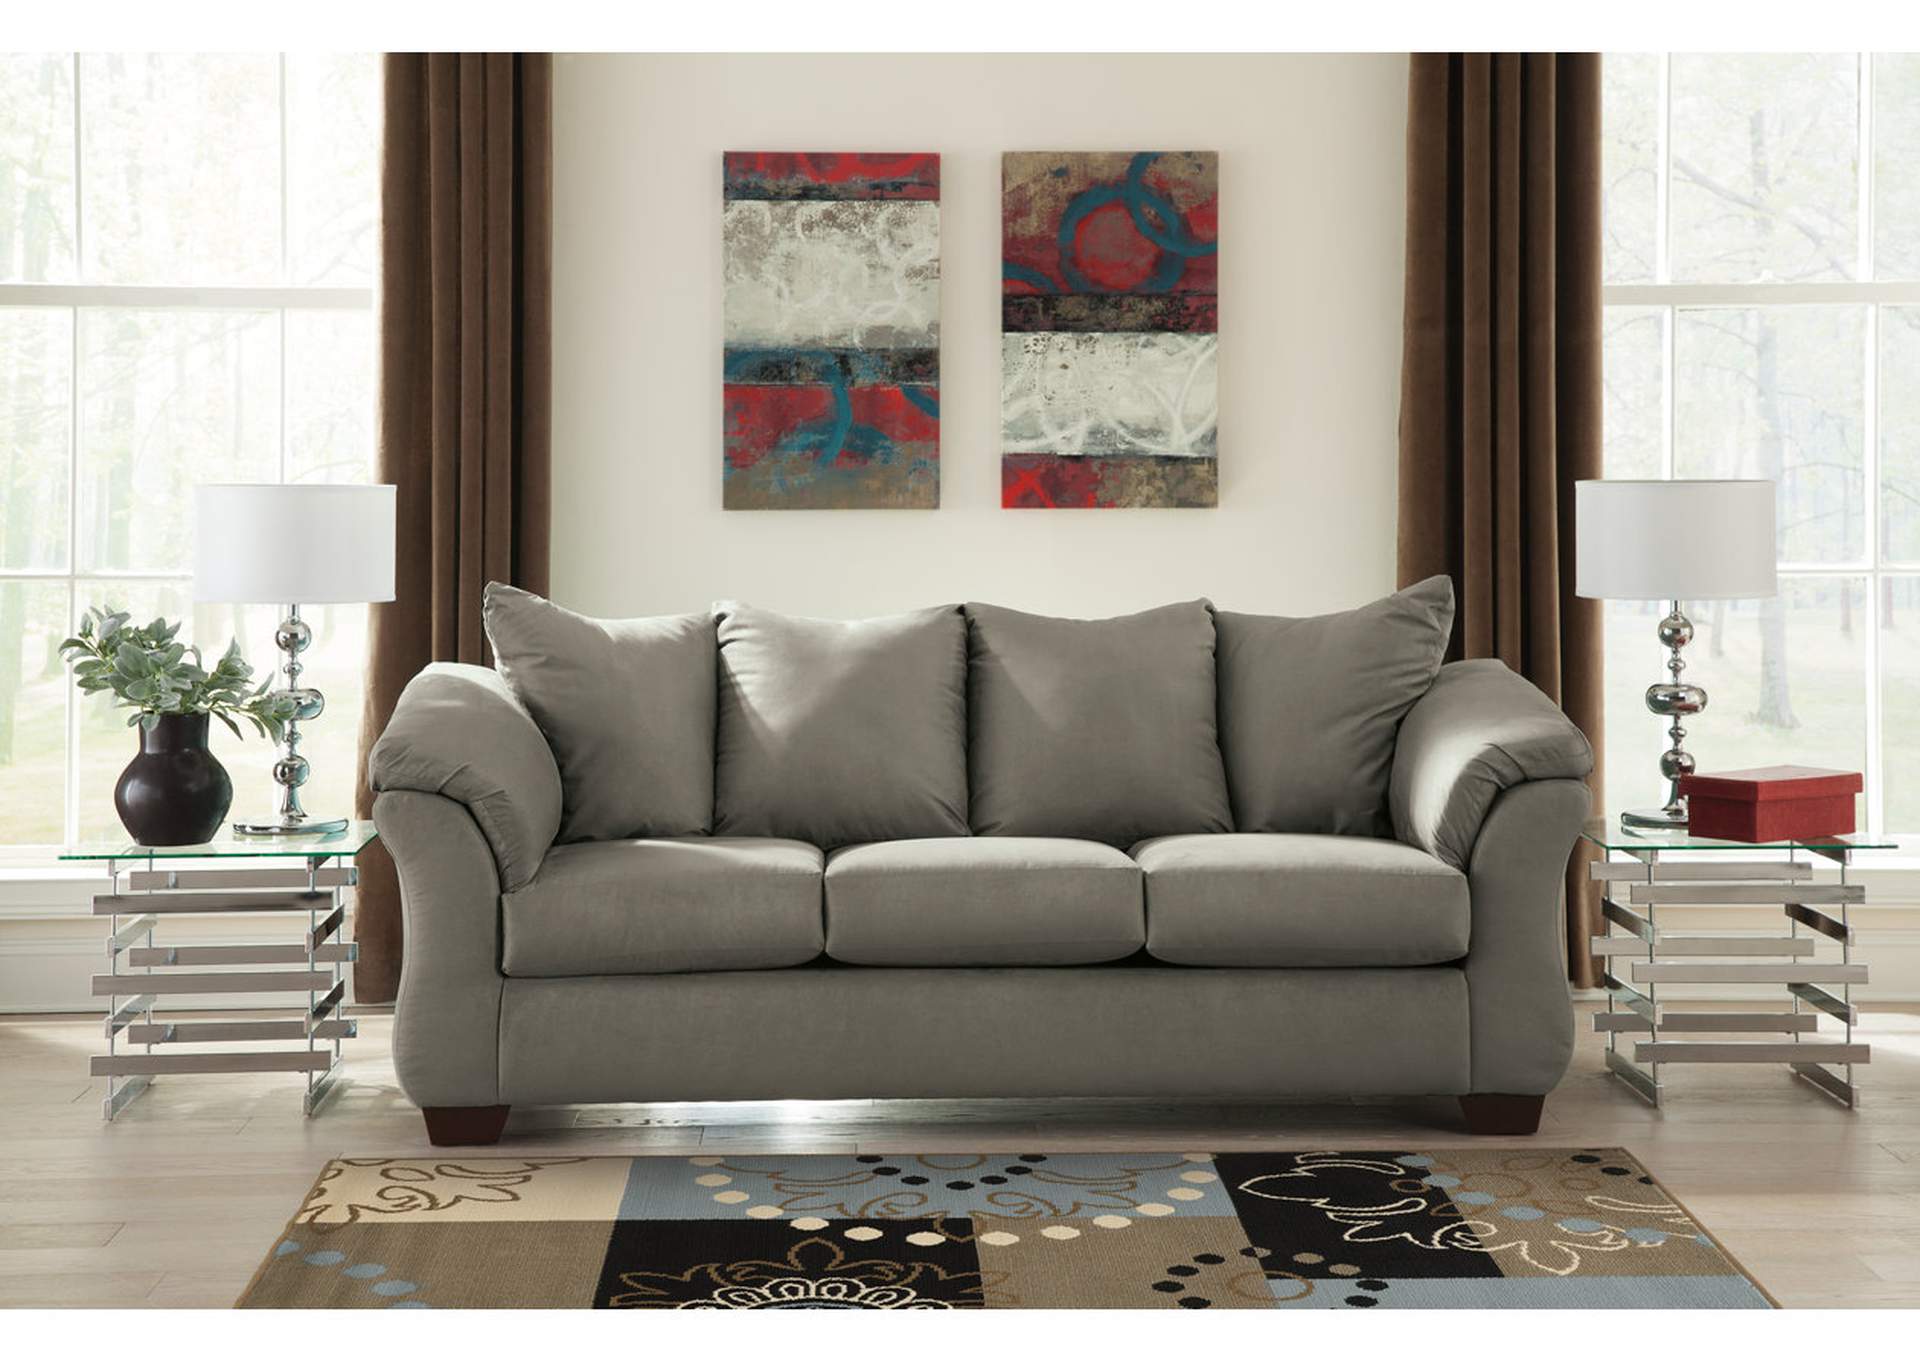 Darcy Sofa, Chair and Ottoman,Signature Design By Ashley